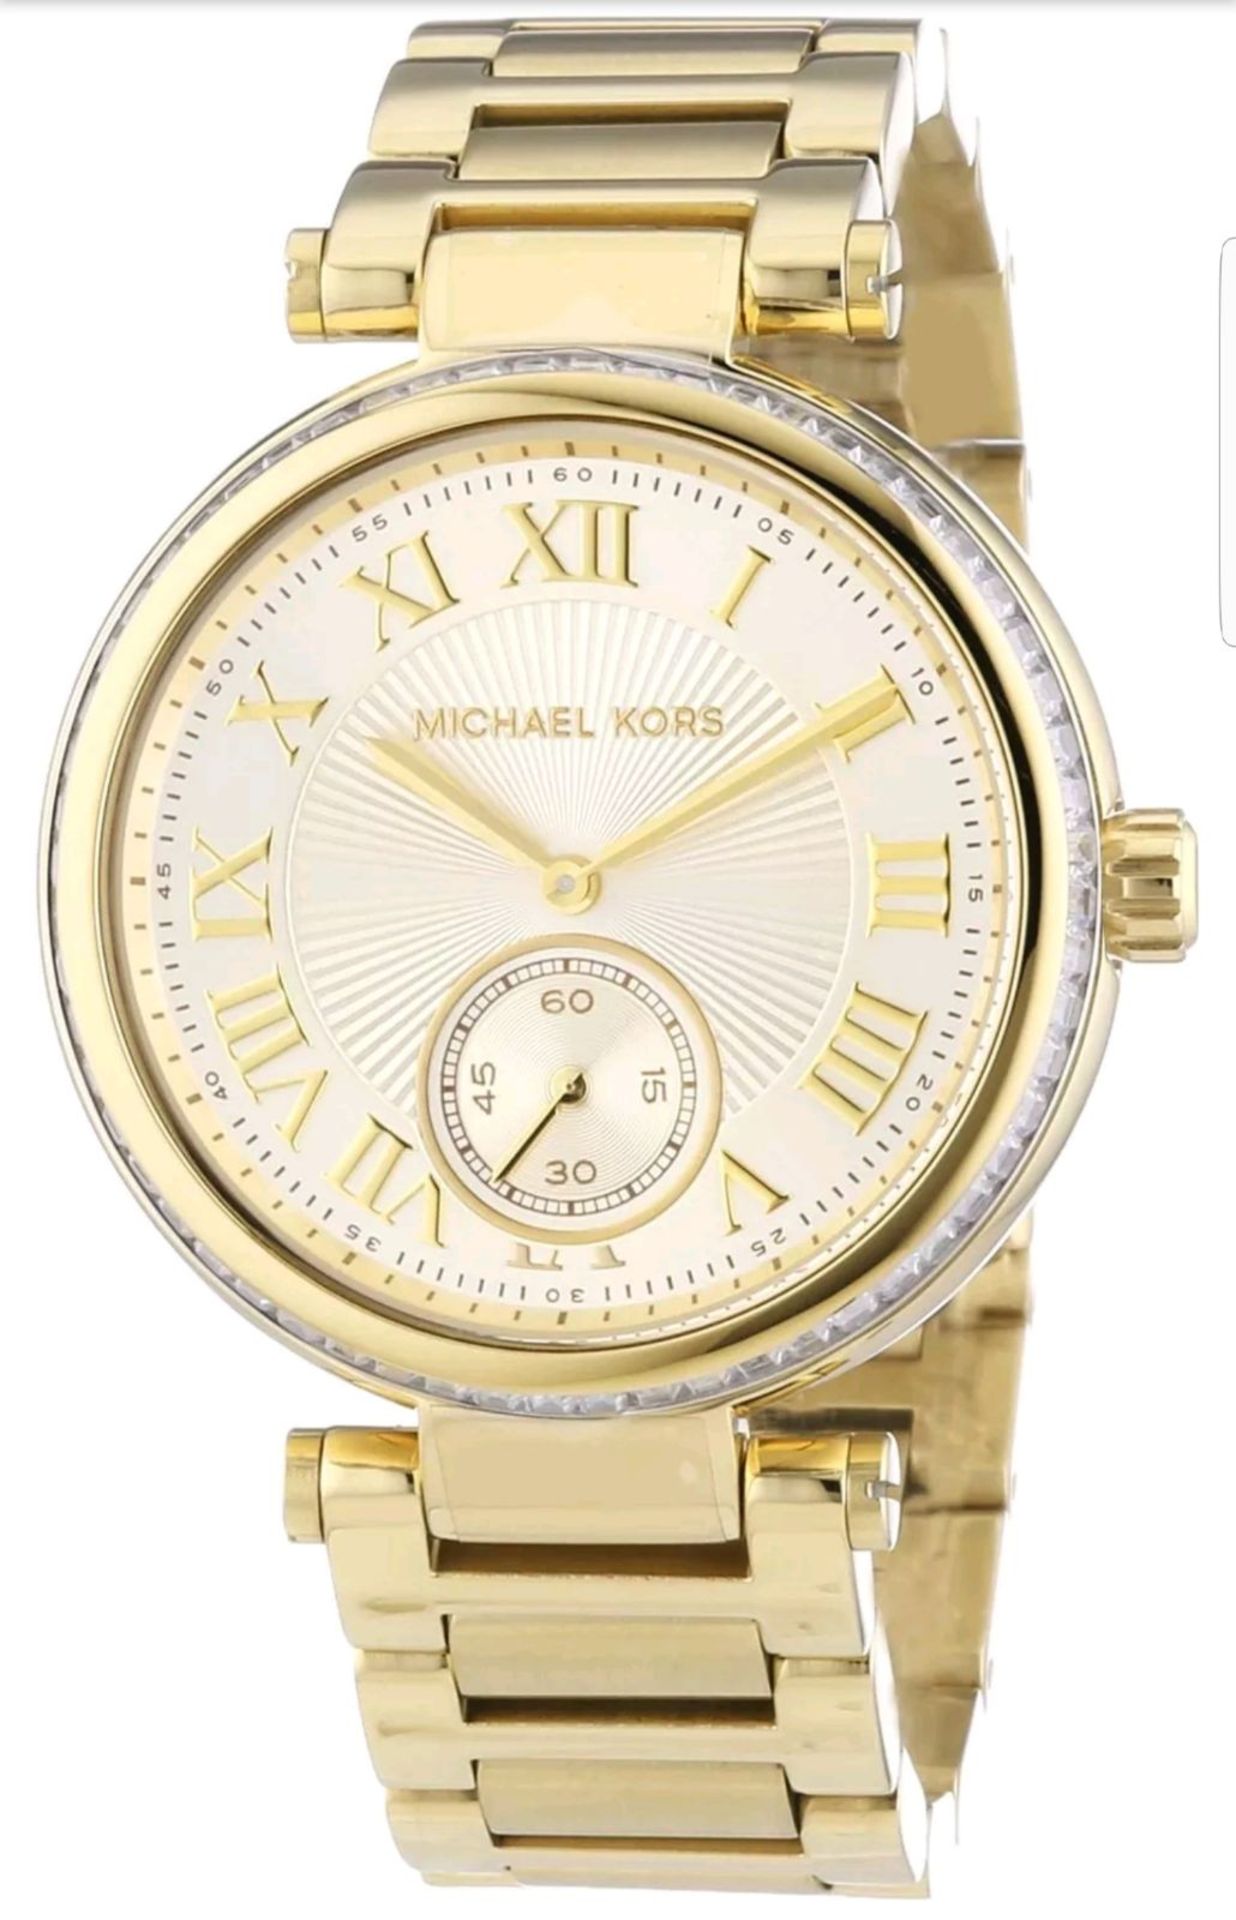 BRAND NEW LADIES MICHAEL KORS WATCH MK5867, COMPLETE WITH ORIGINAL PACKAGING AND MANUAL